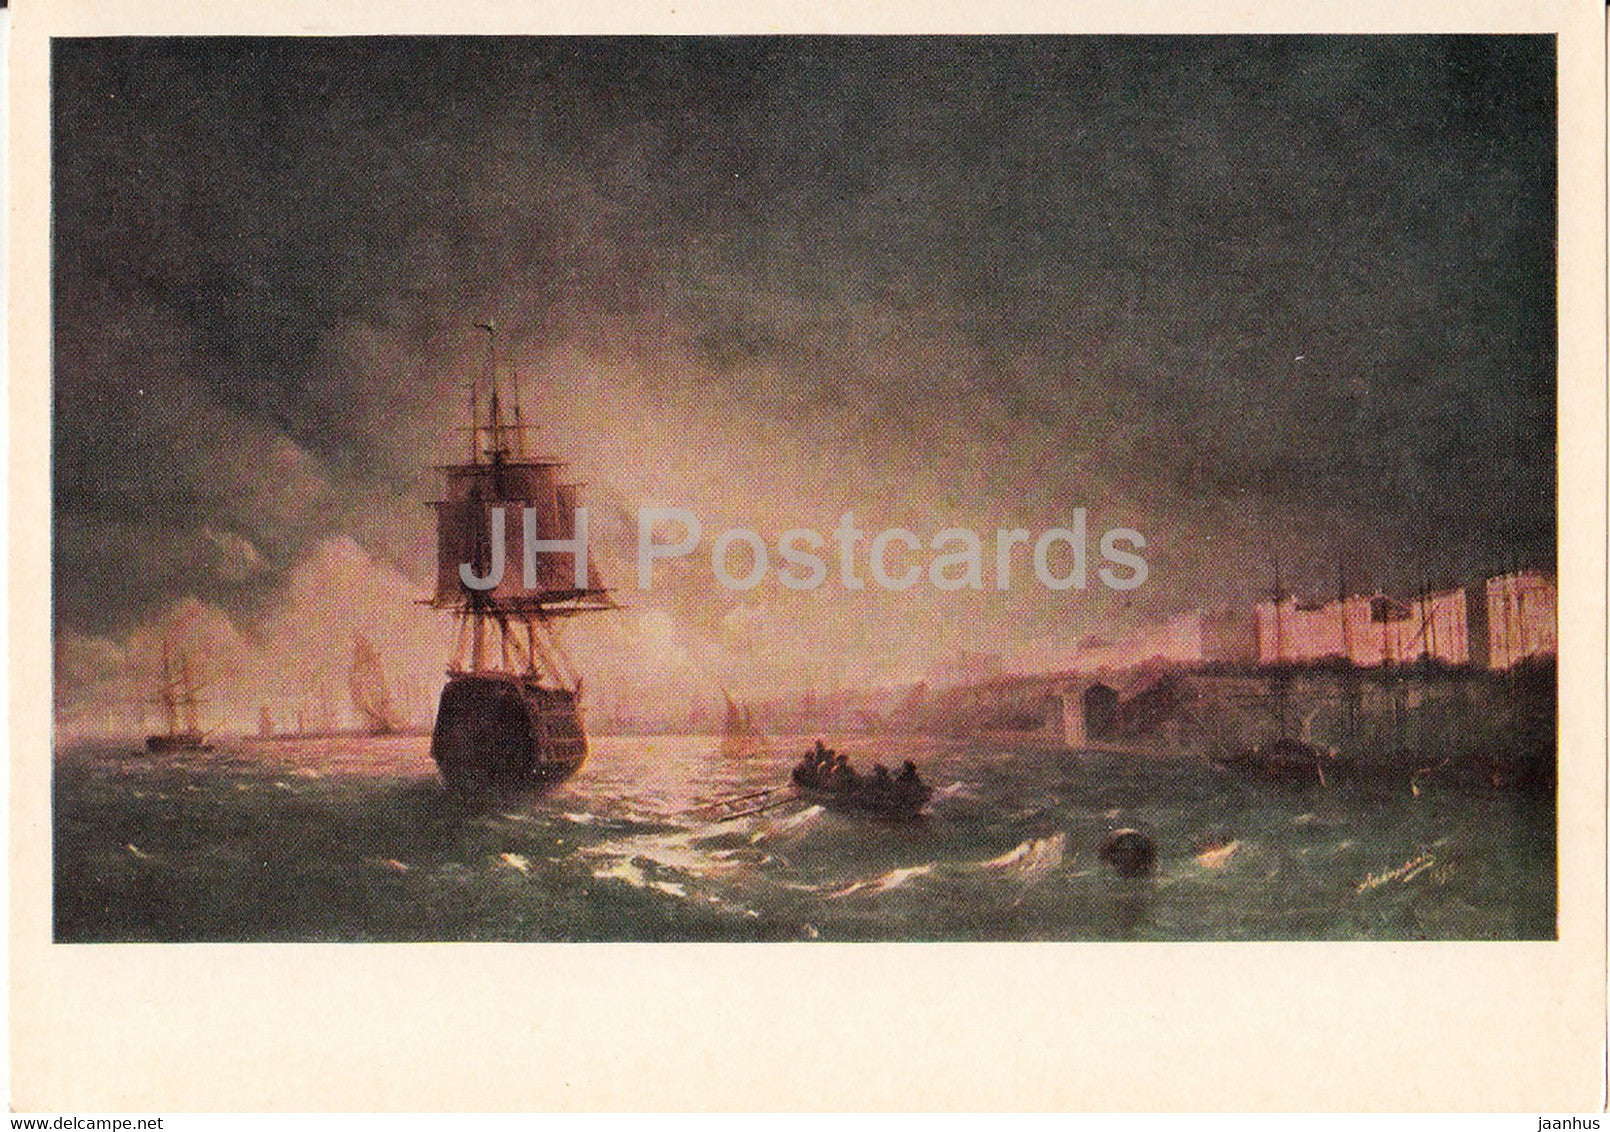 painting by Ivan Aivazovsky - Odessa view - sailing ship - Russian art - 1973 - Russia USSR - unused - JH Postcards